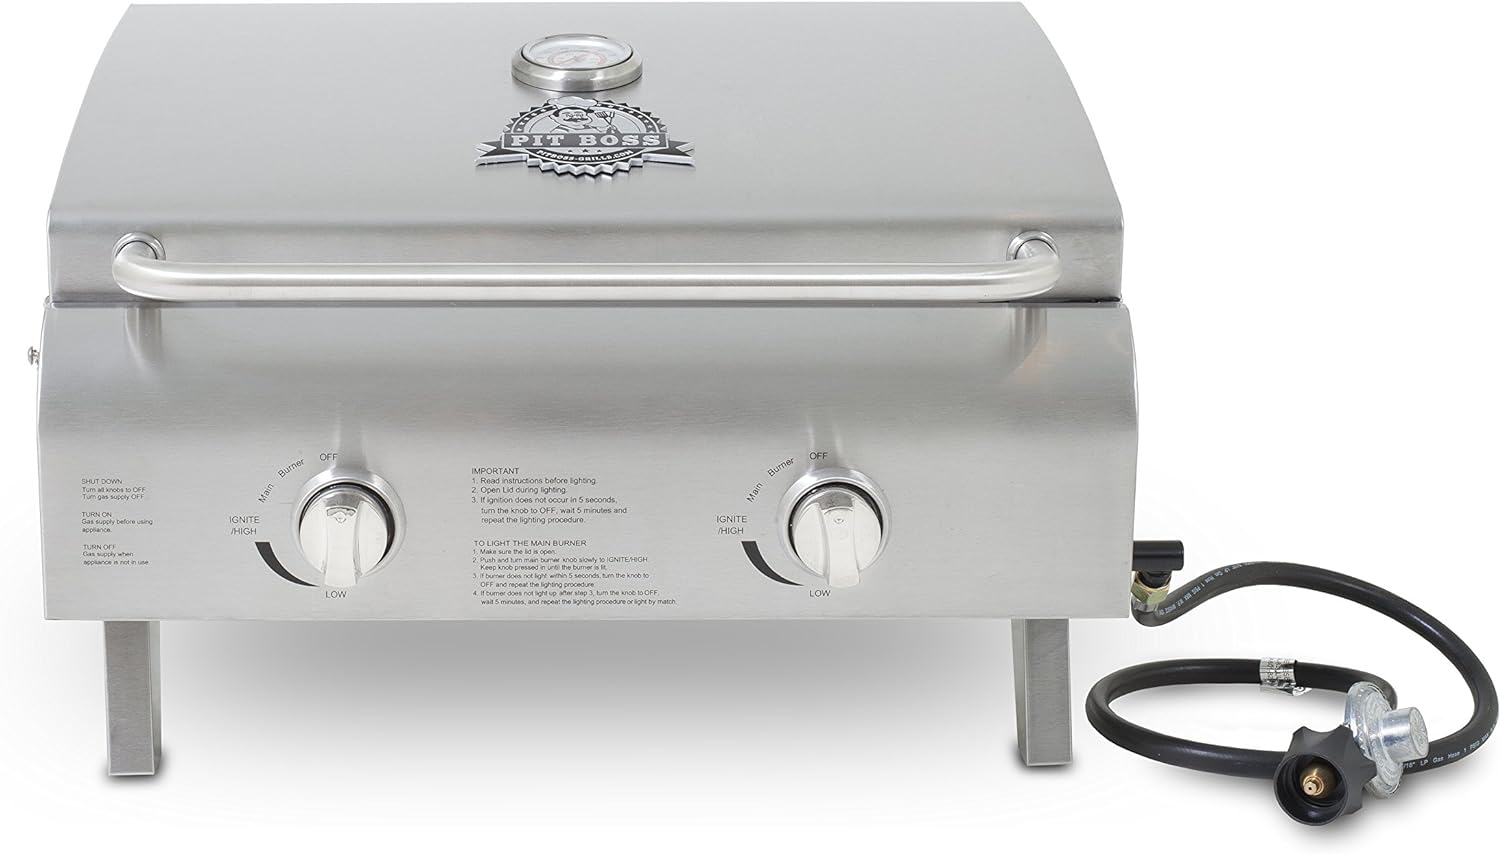 Pit Boss Grills 75275 Review